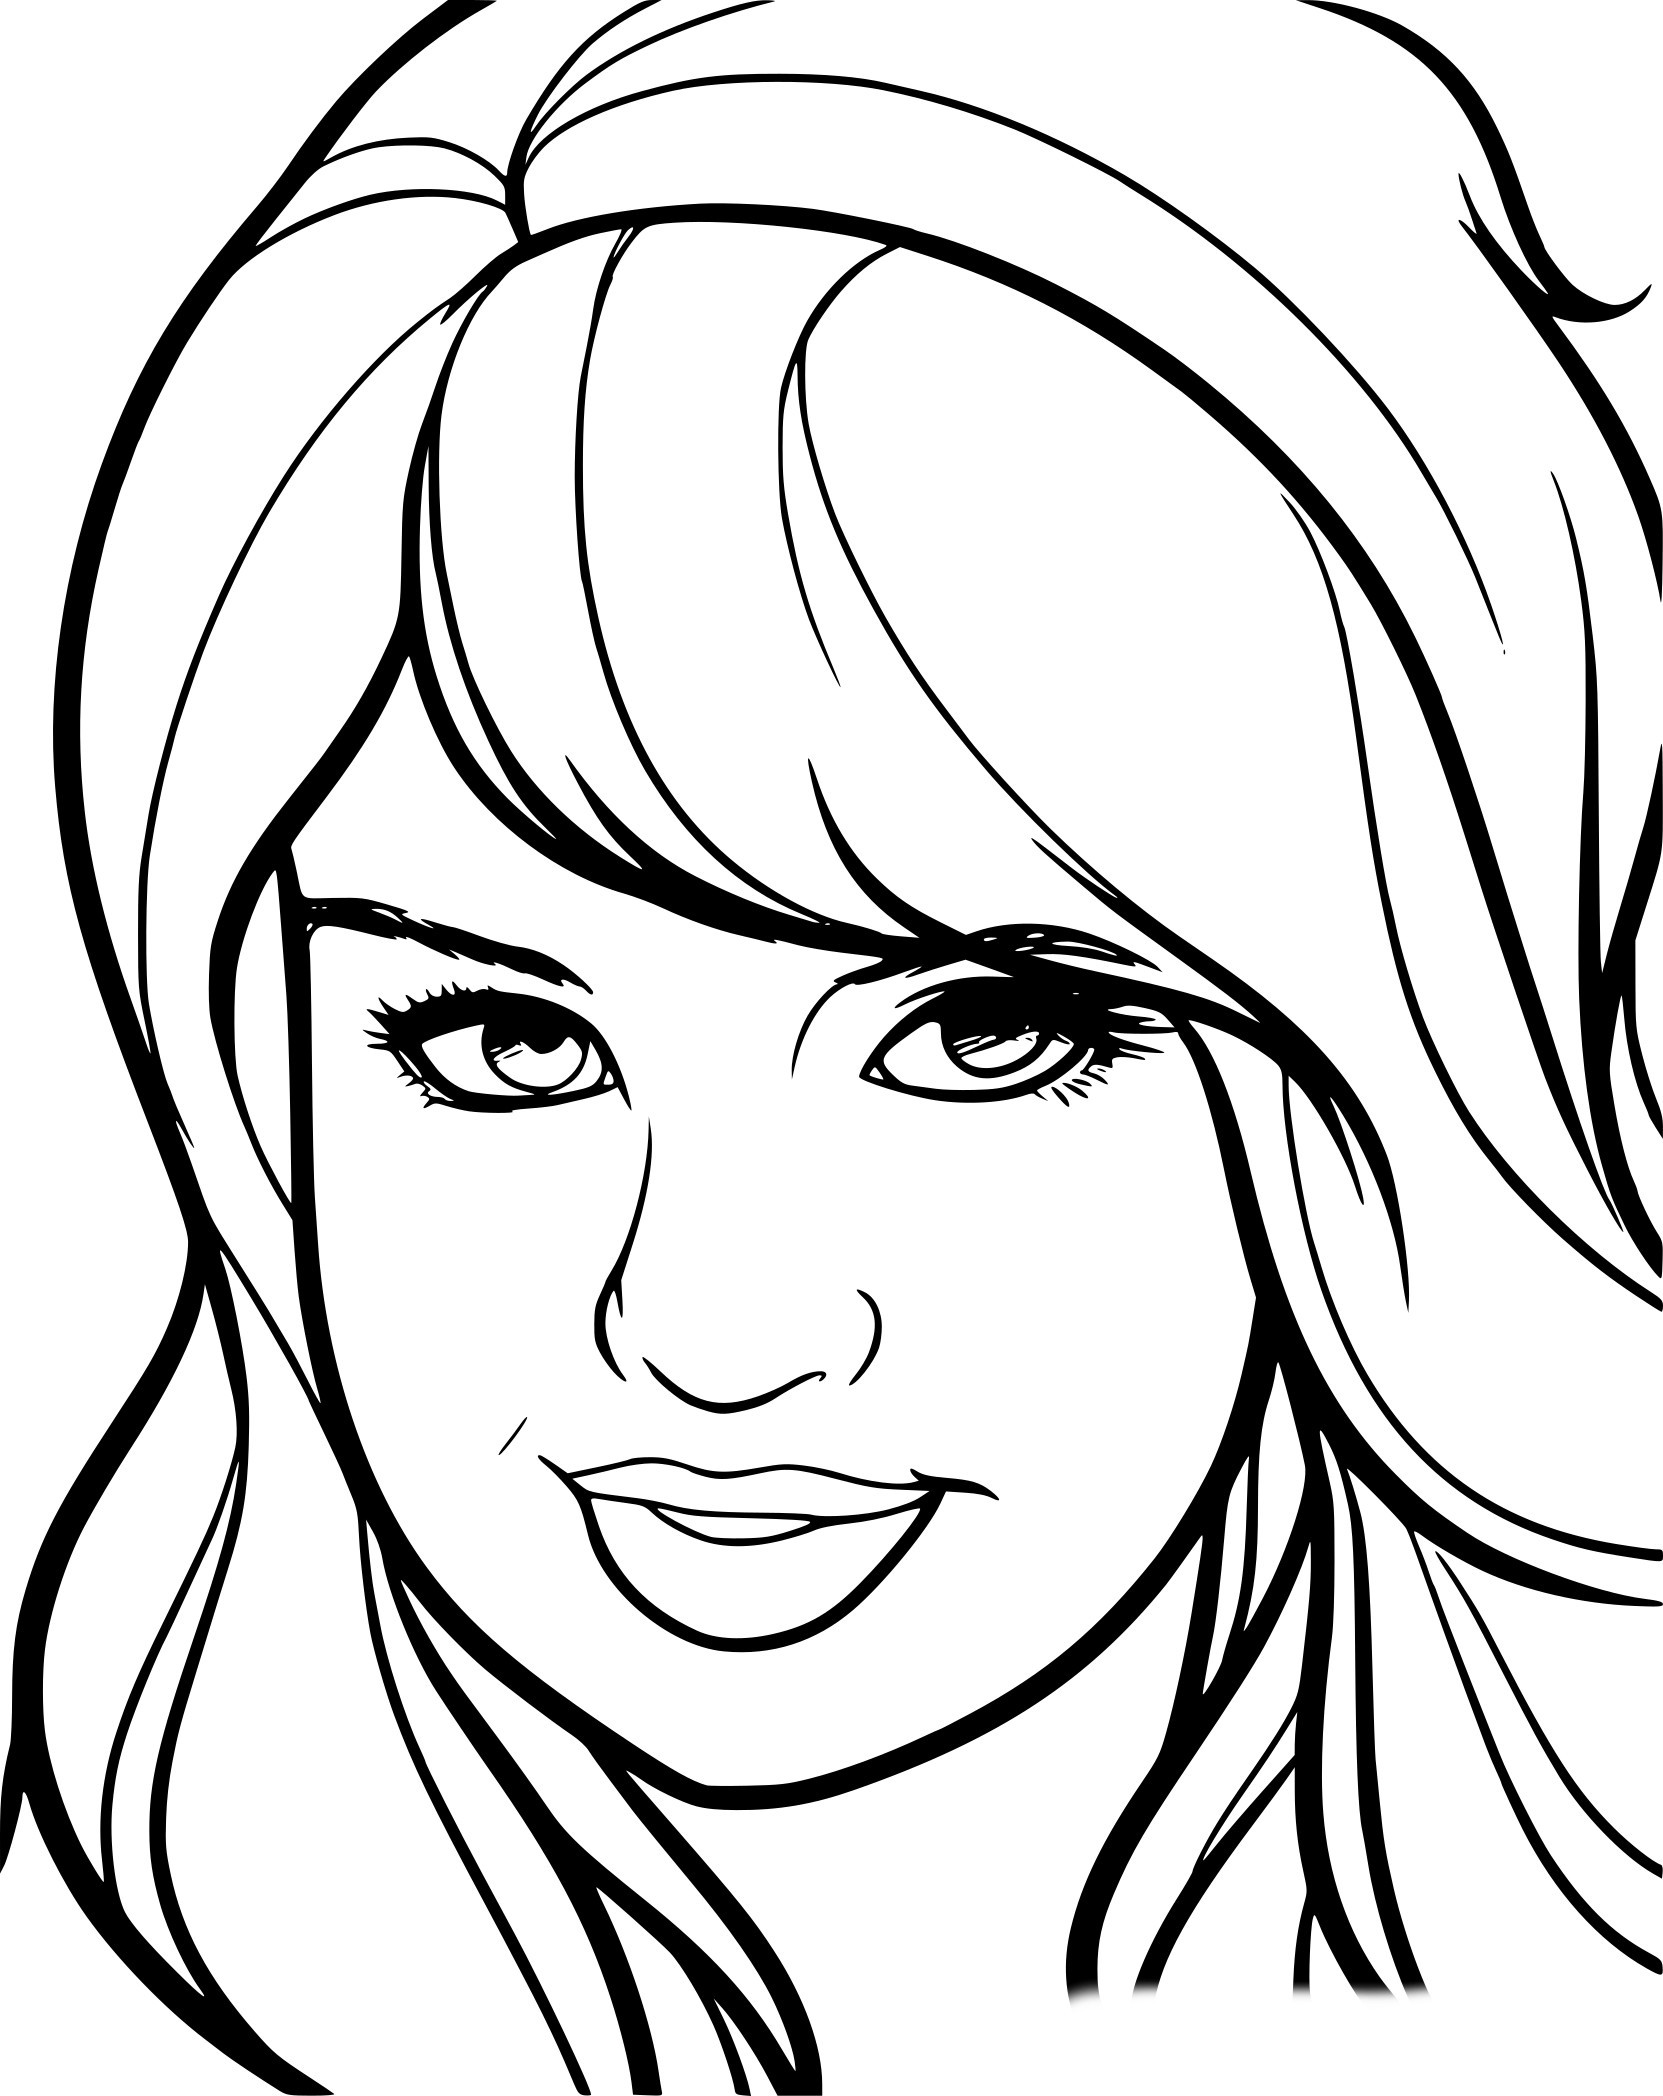 Ryan Coloring Pages
 Debby Ryan Coloring Pages Coloring Pages